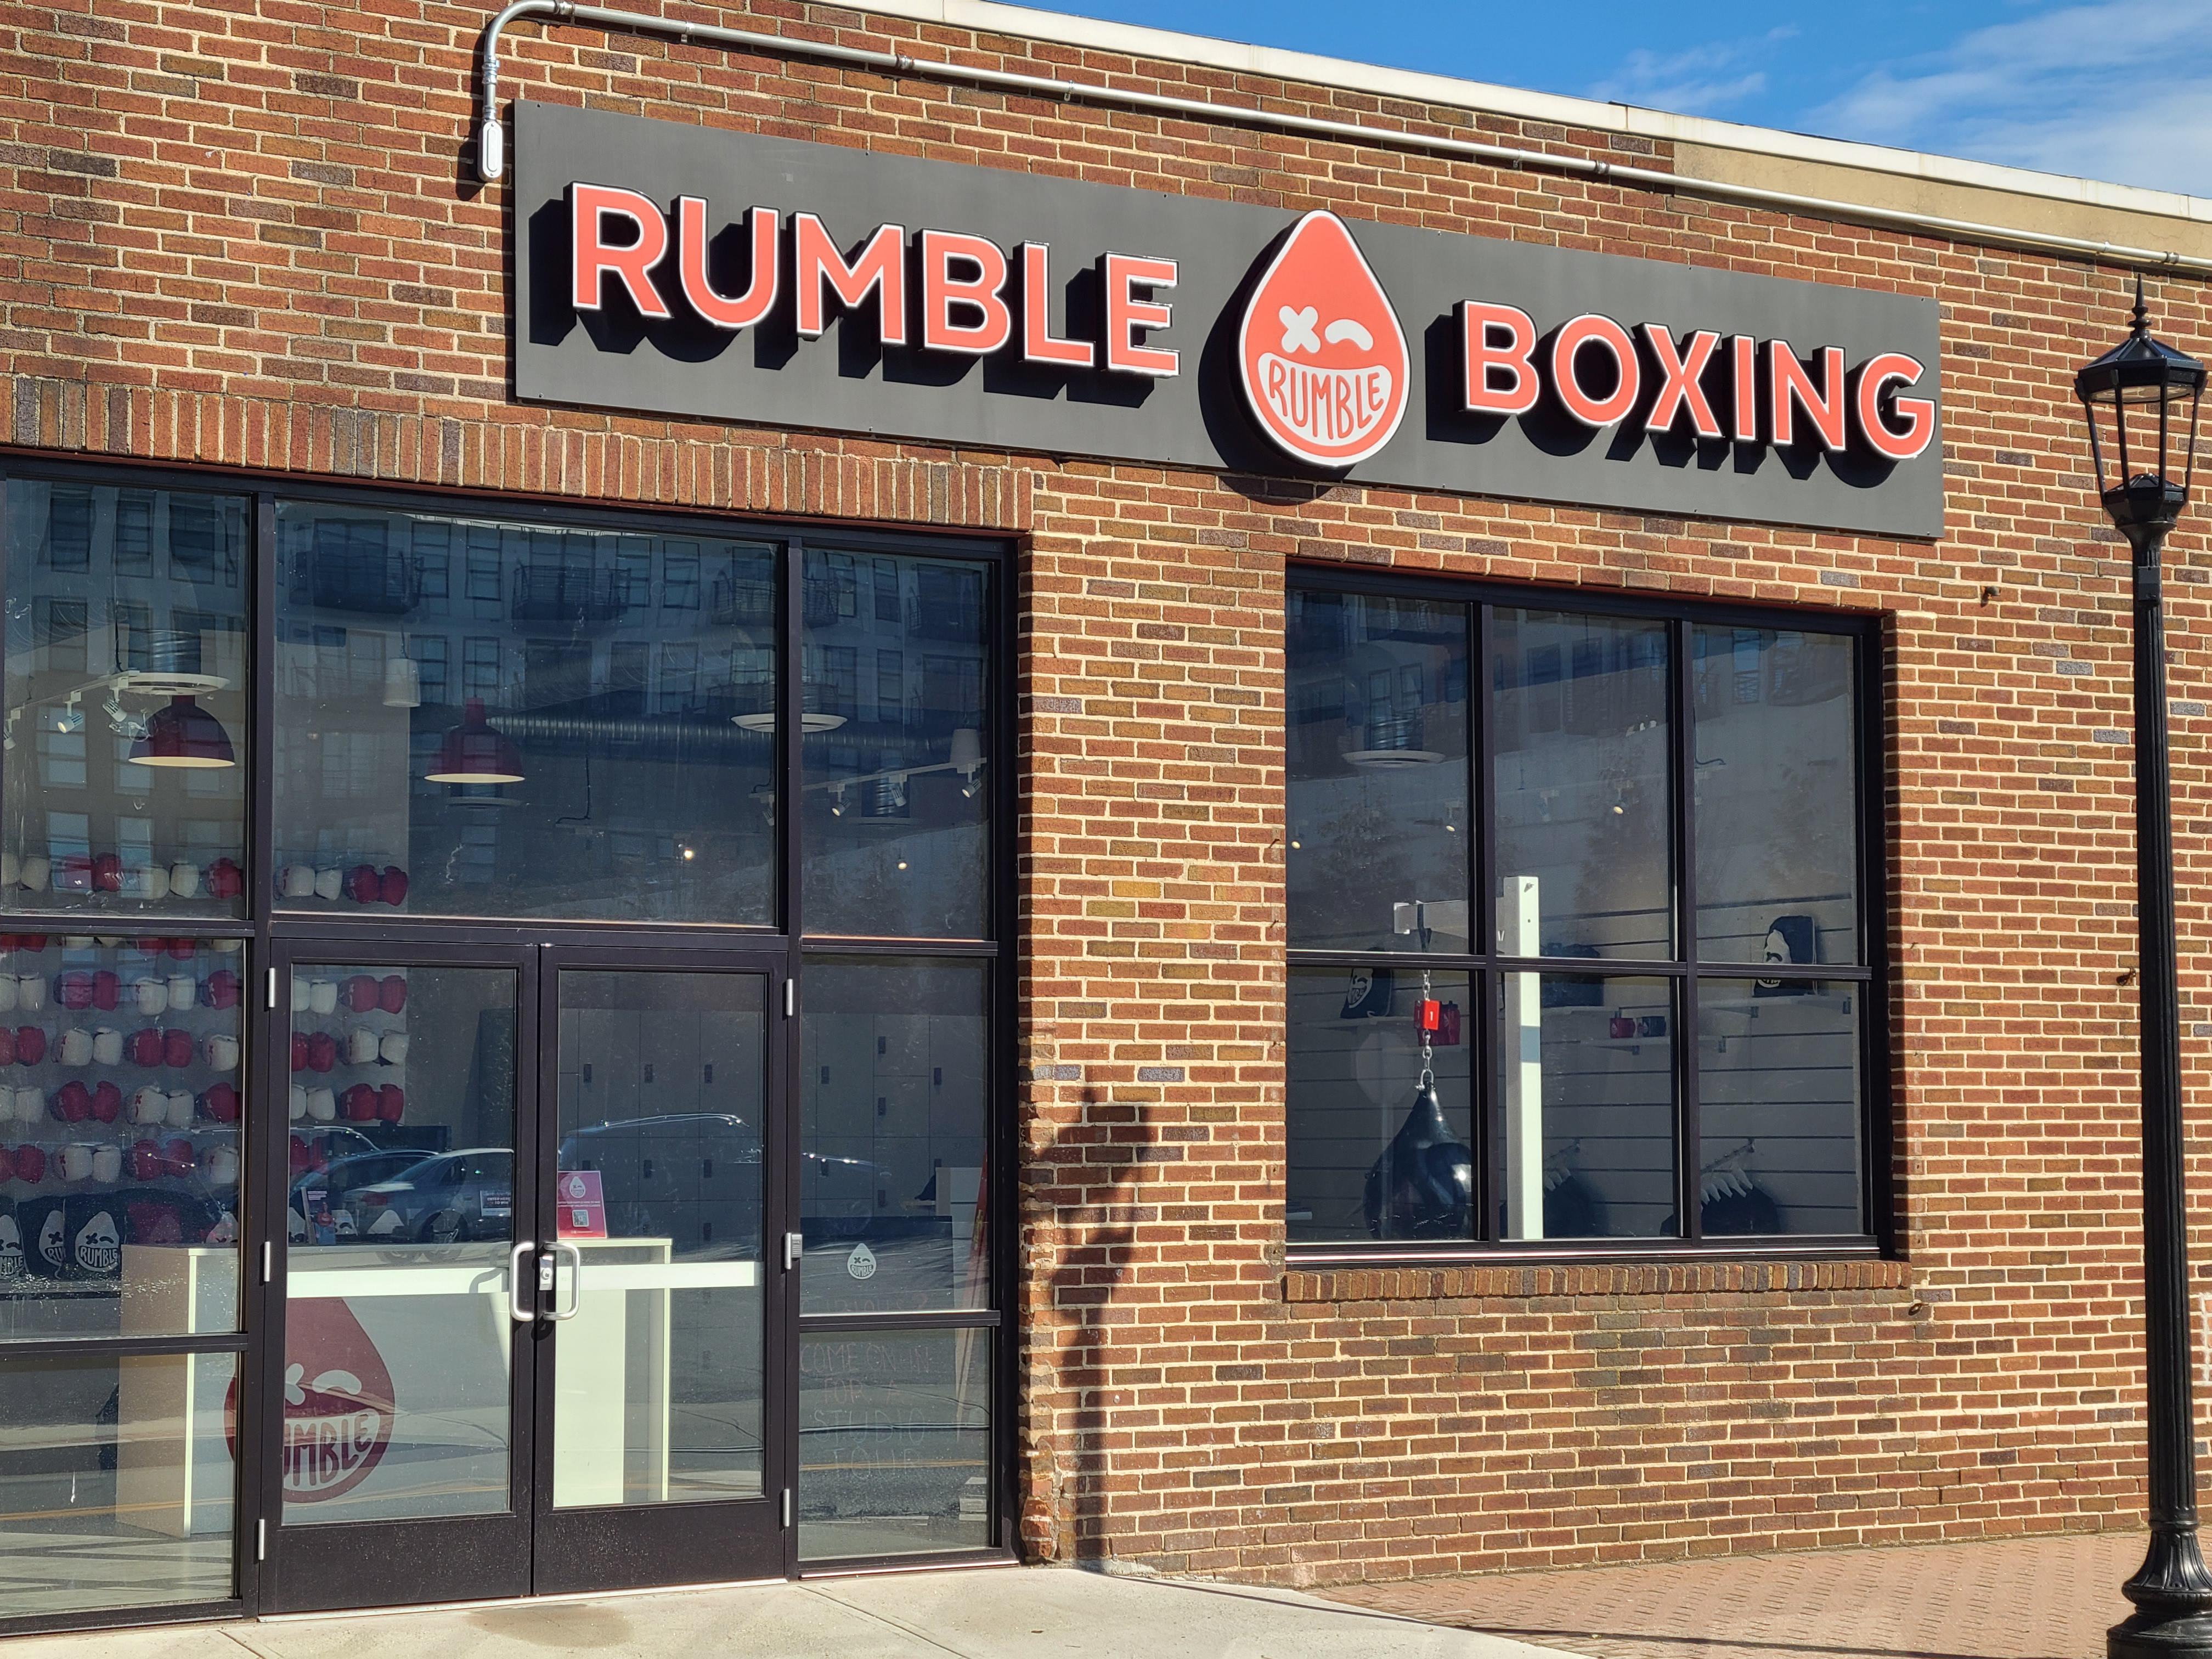 Rumble Boxing coming soon to SoNo Square - looking forward to seeing you around town!